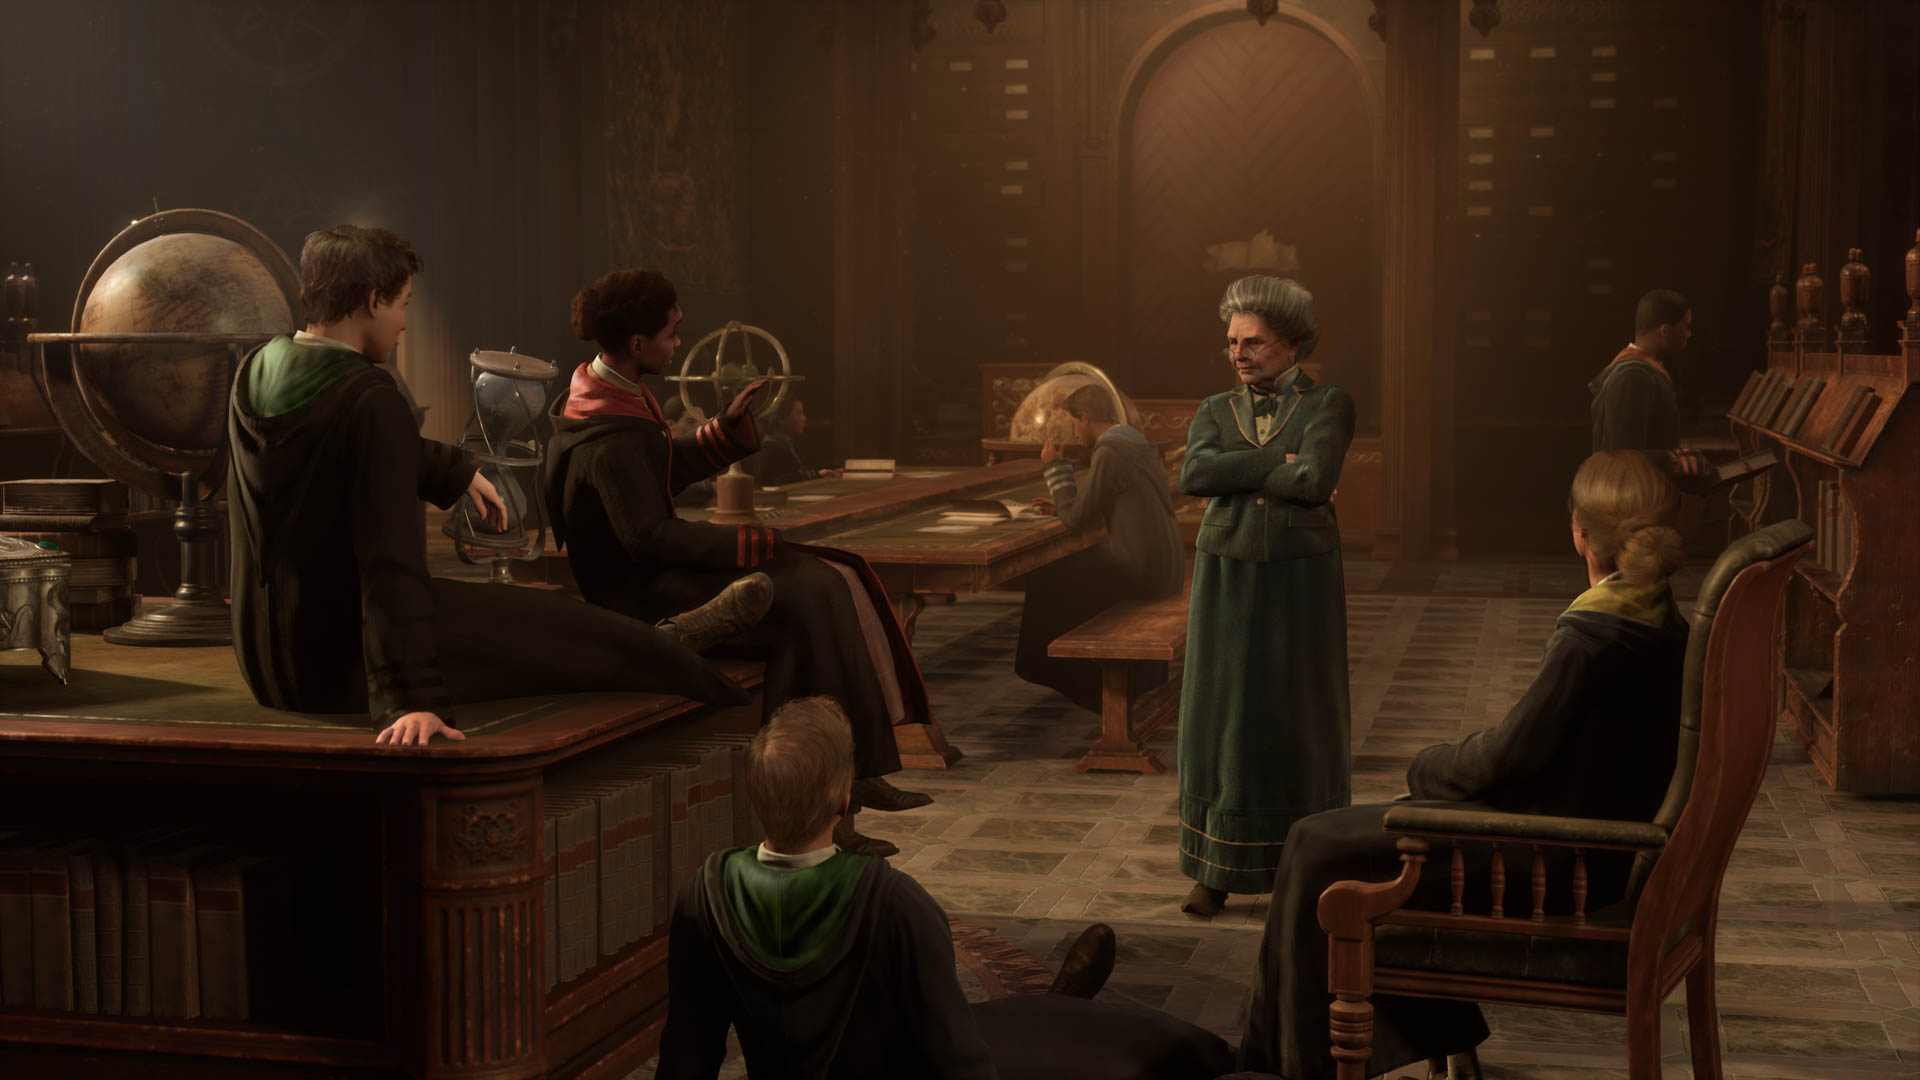 hogwarts legacy release time pc